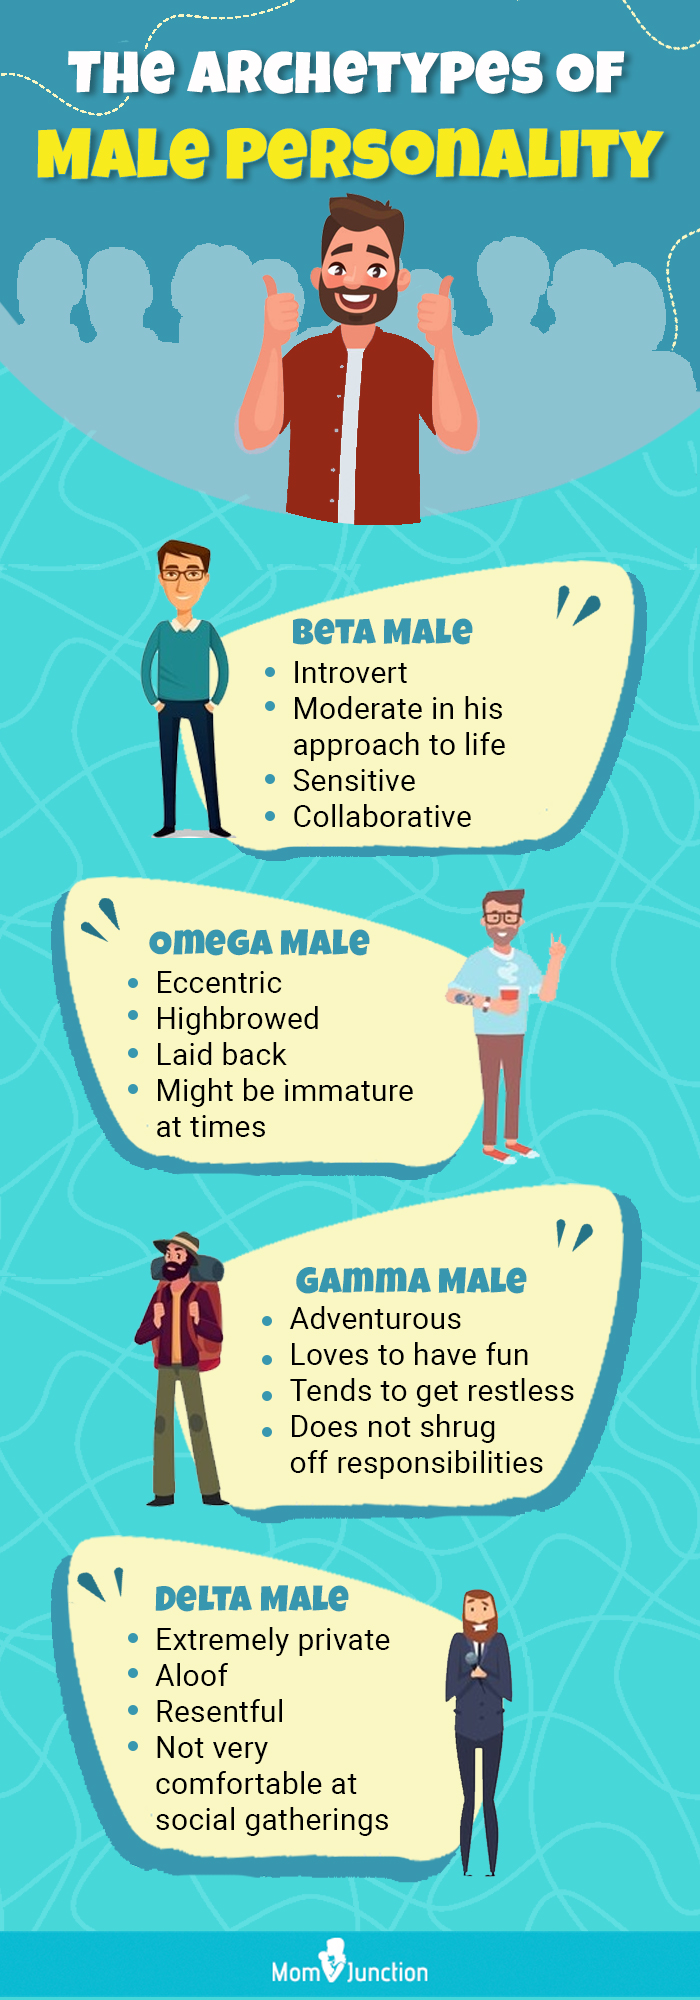 the archetypes of male personality [infographic]